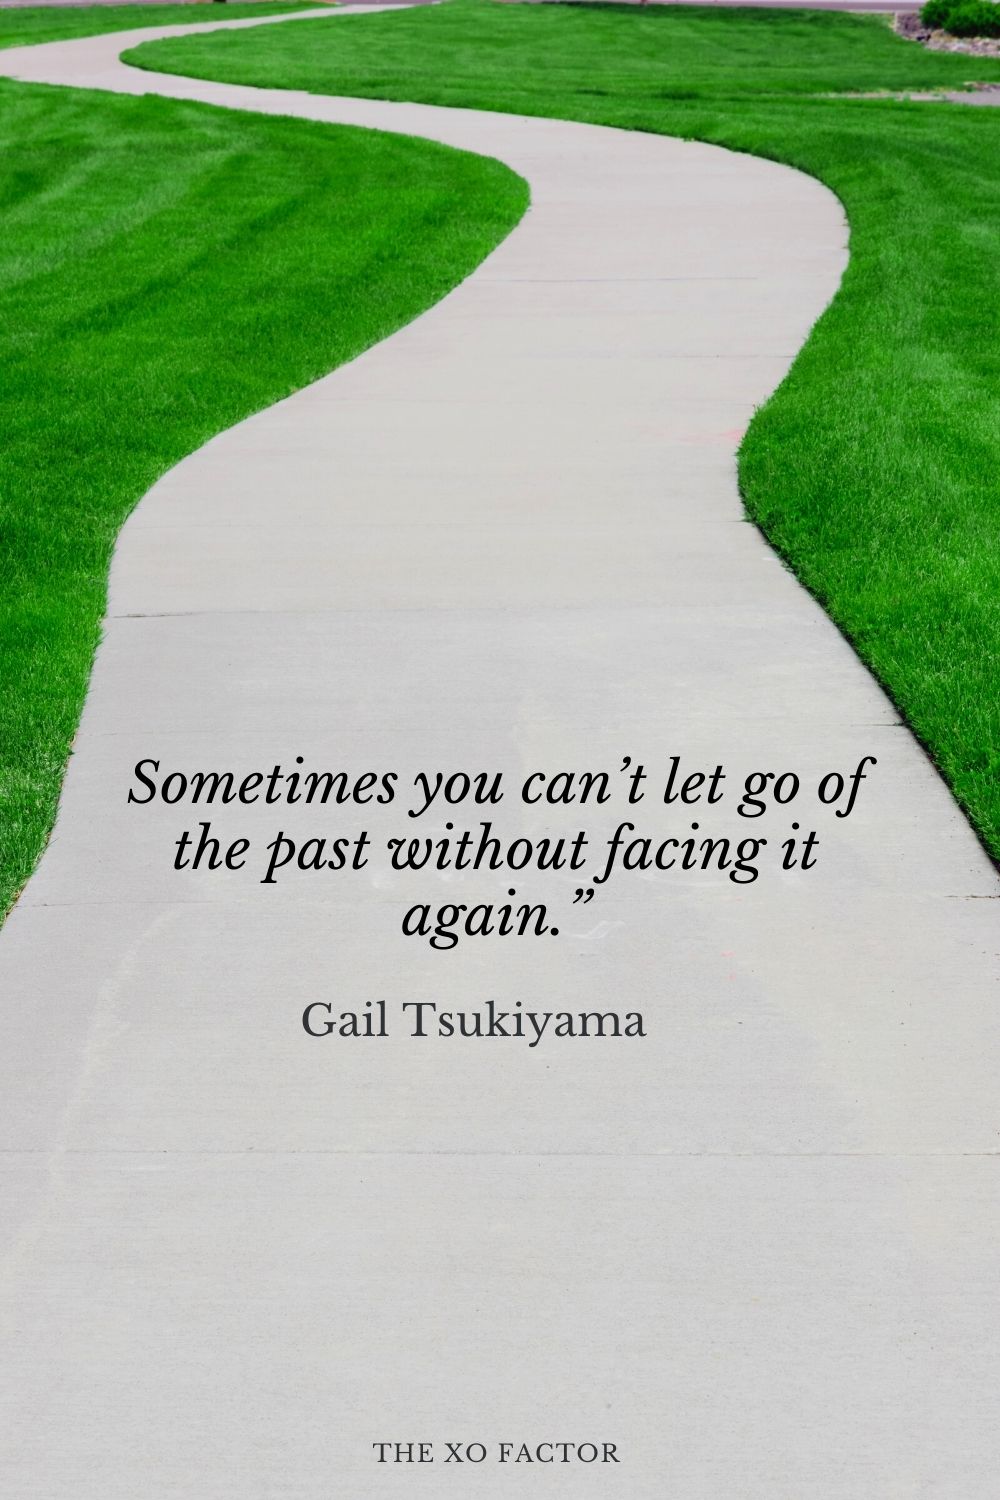 Sometimes you can’t let go of the past without facing it again.” Gail Tsukiyama